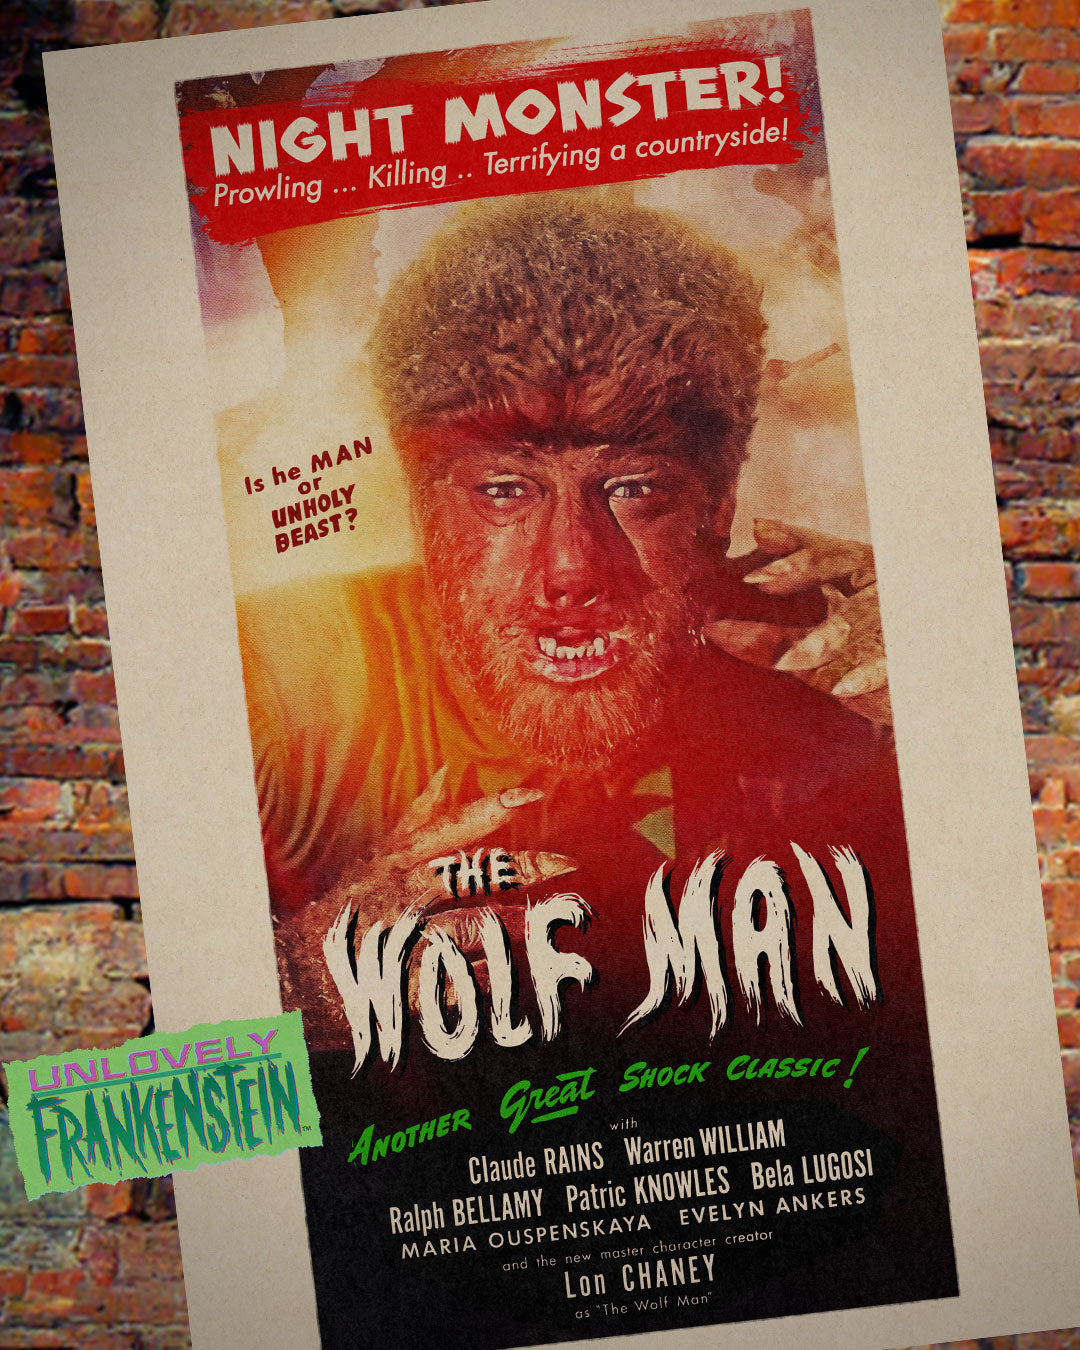 Lon Chaney as The Wolf-Man character poster | 11x17 Art Print